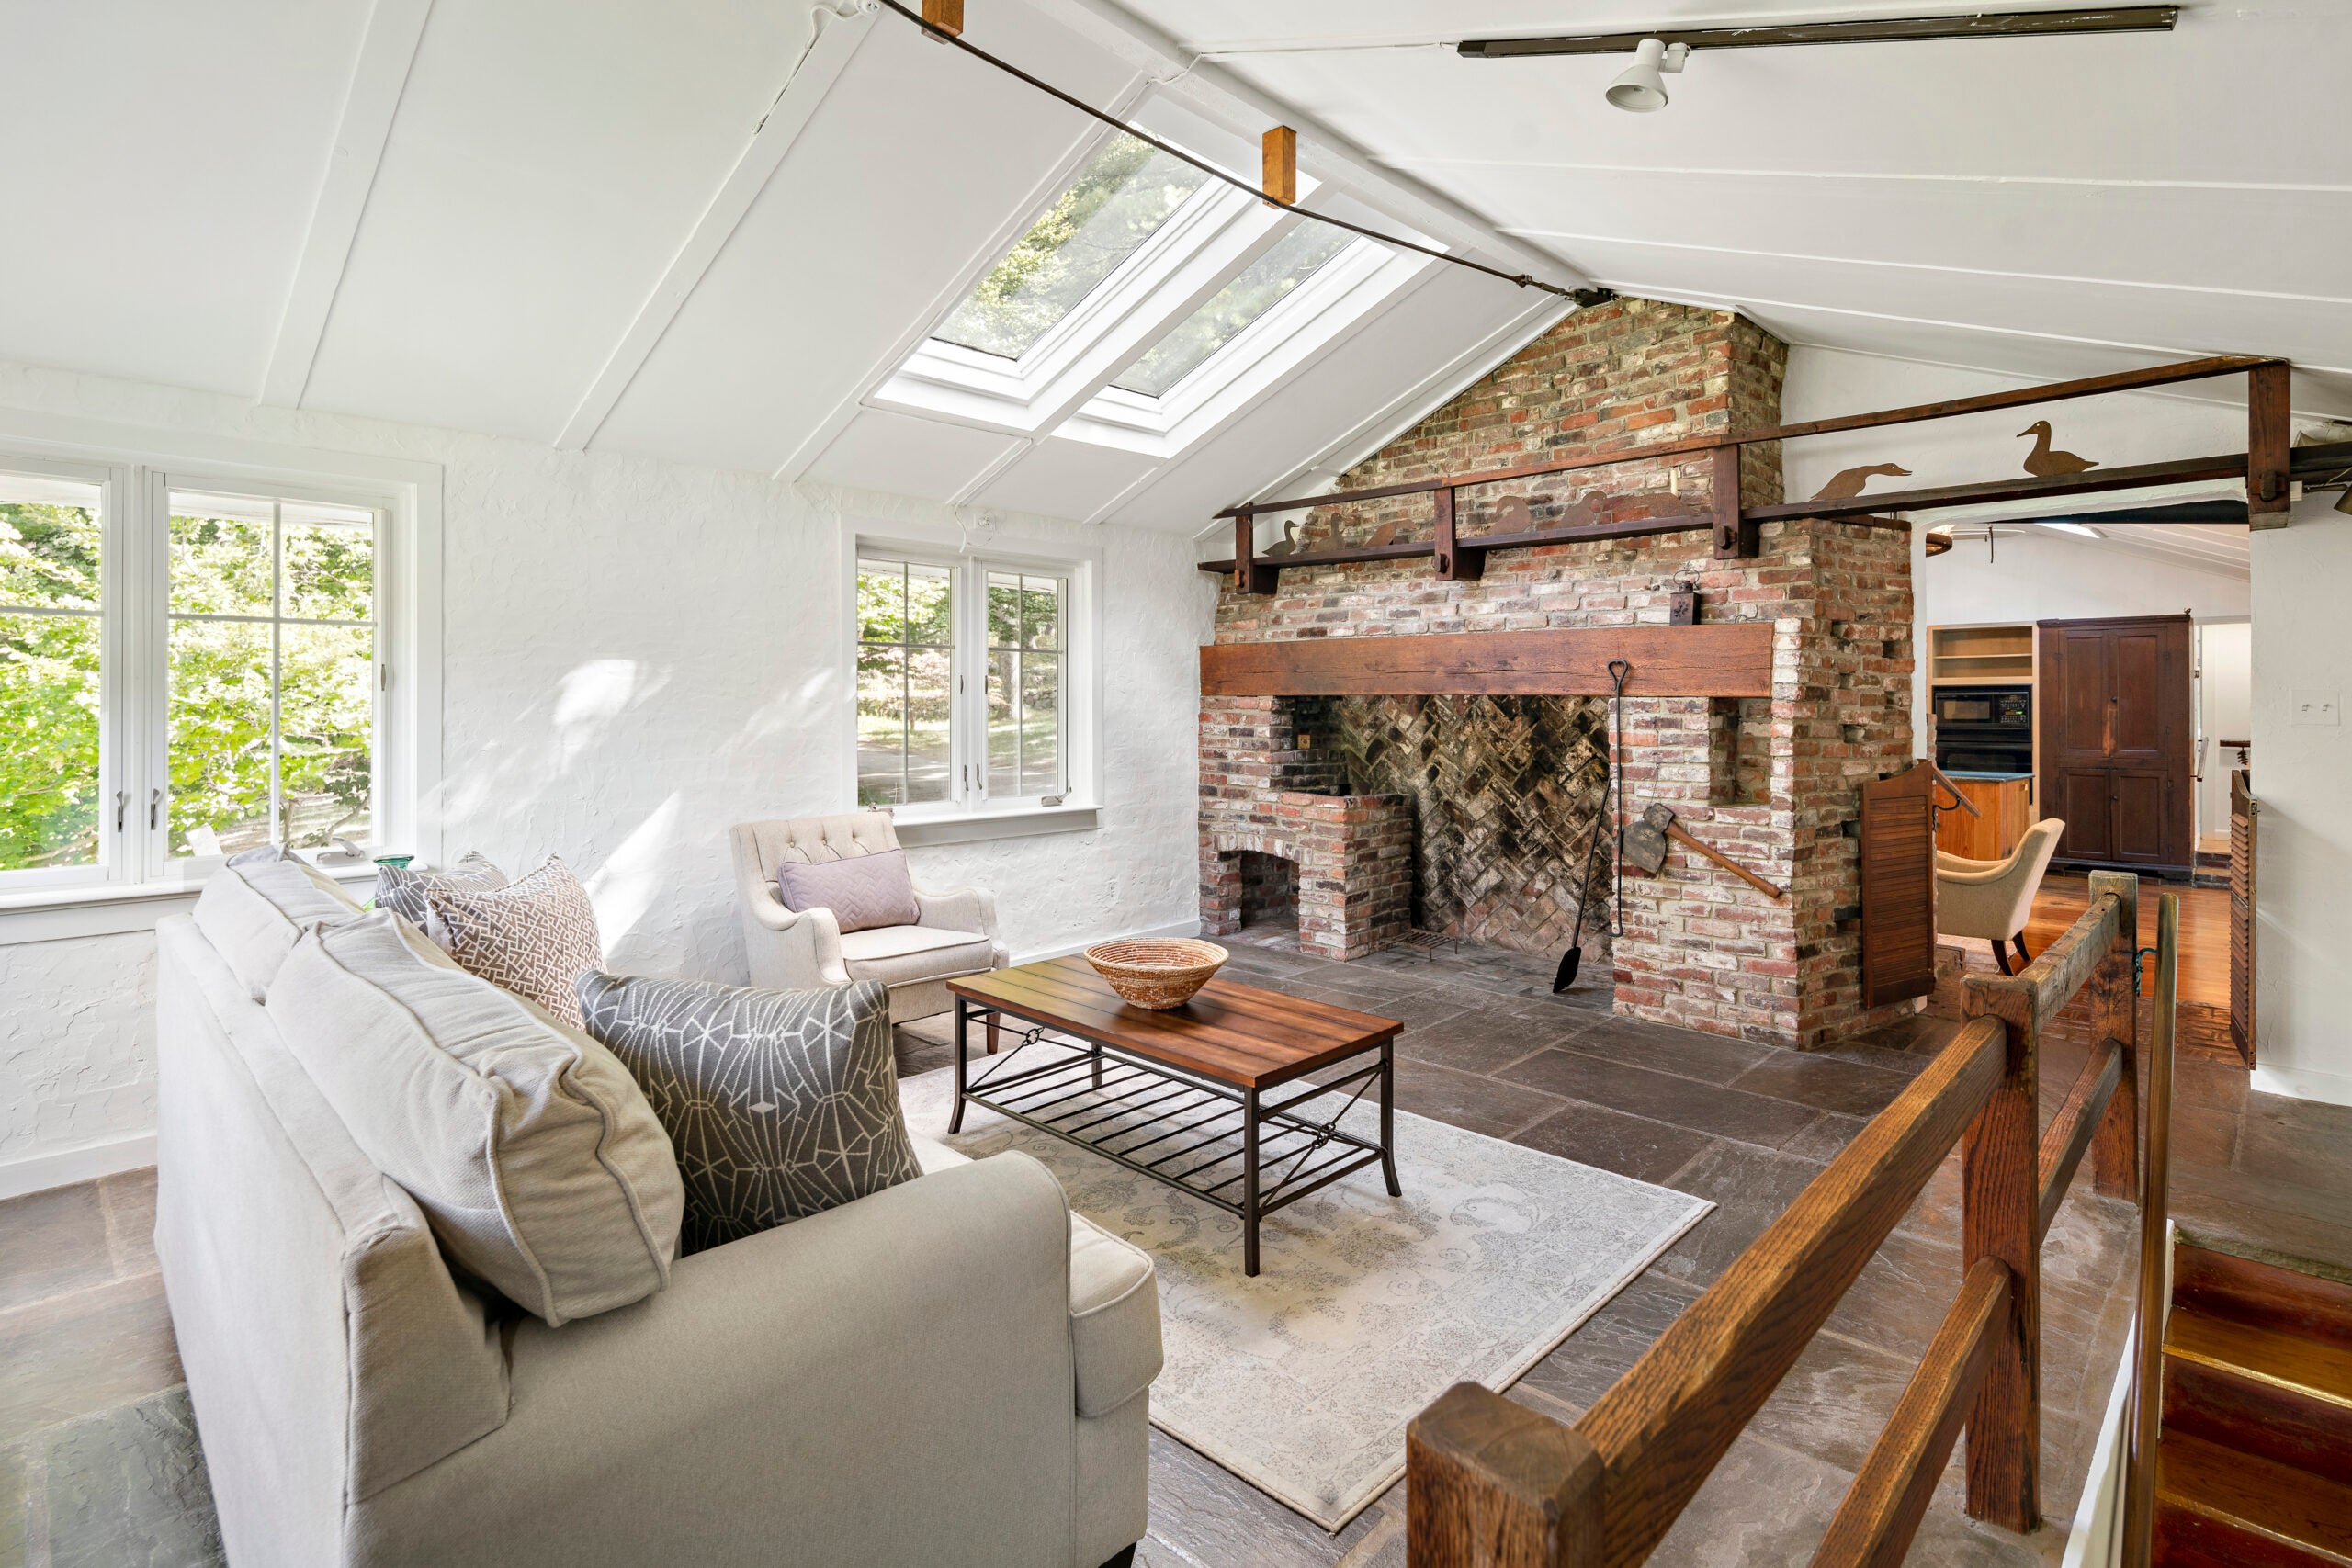 A white-walled room with skylights and  a brick fireplace.